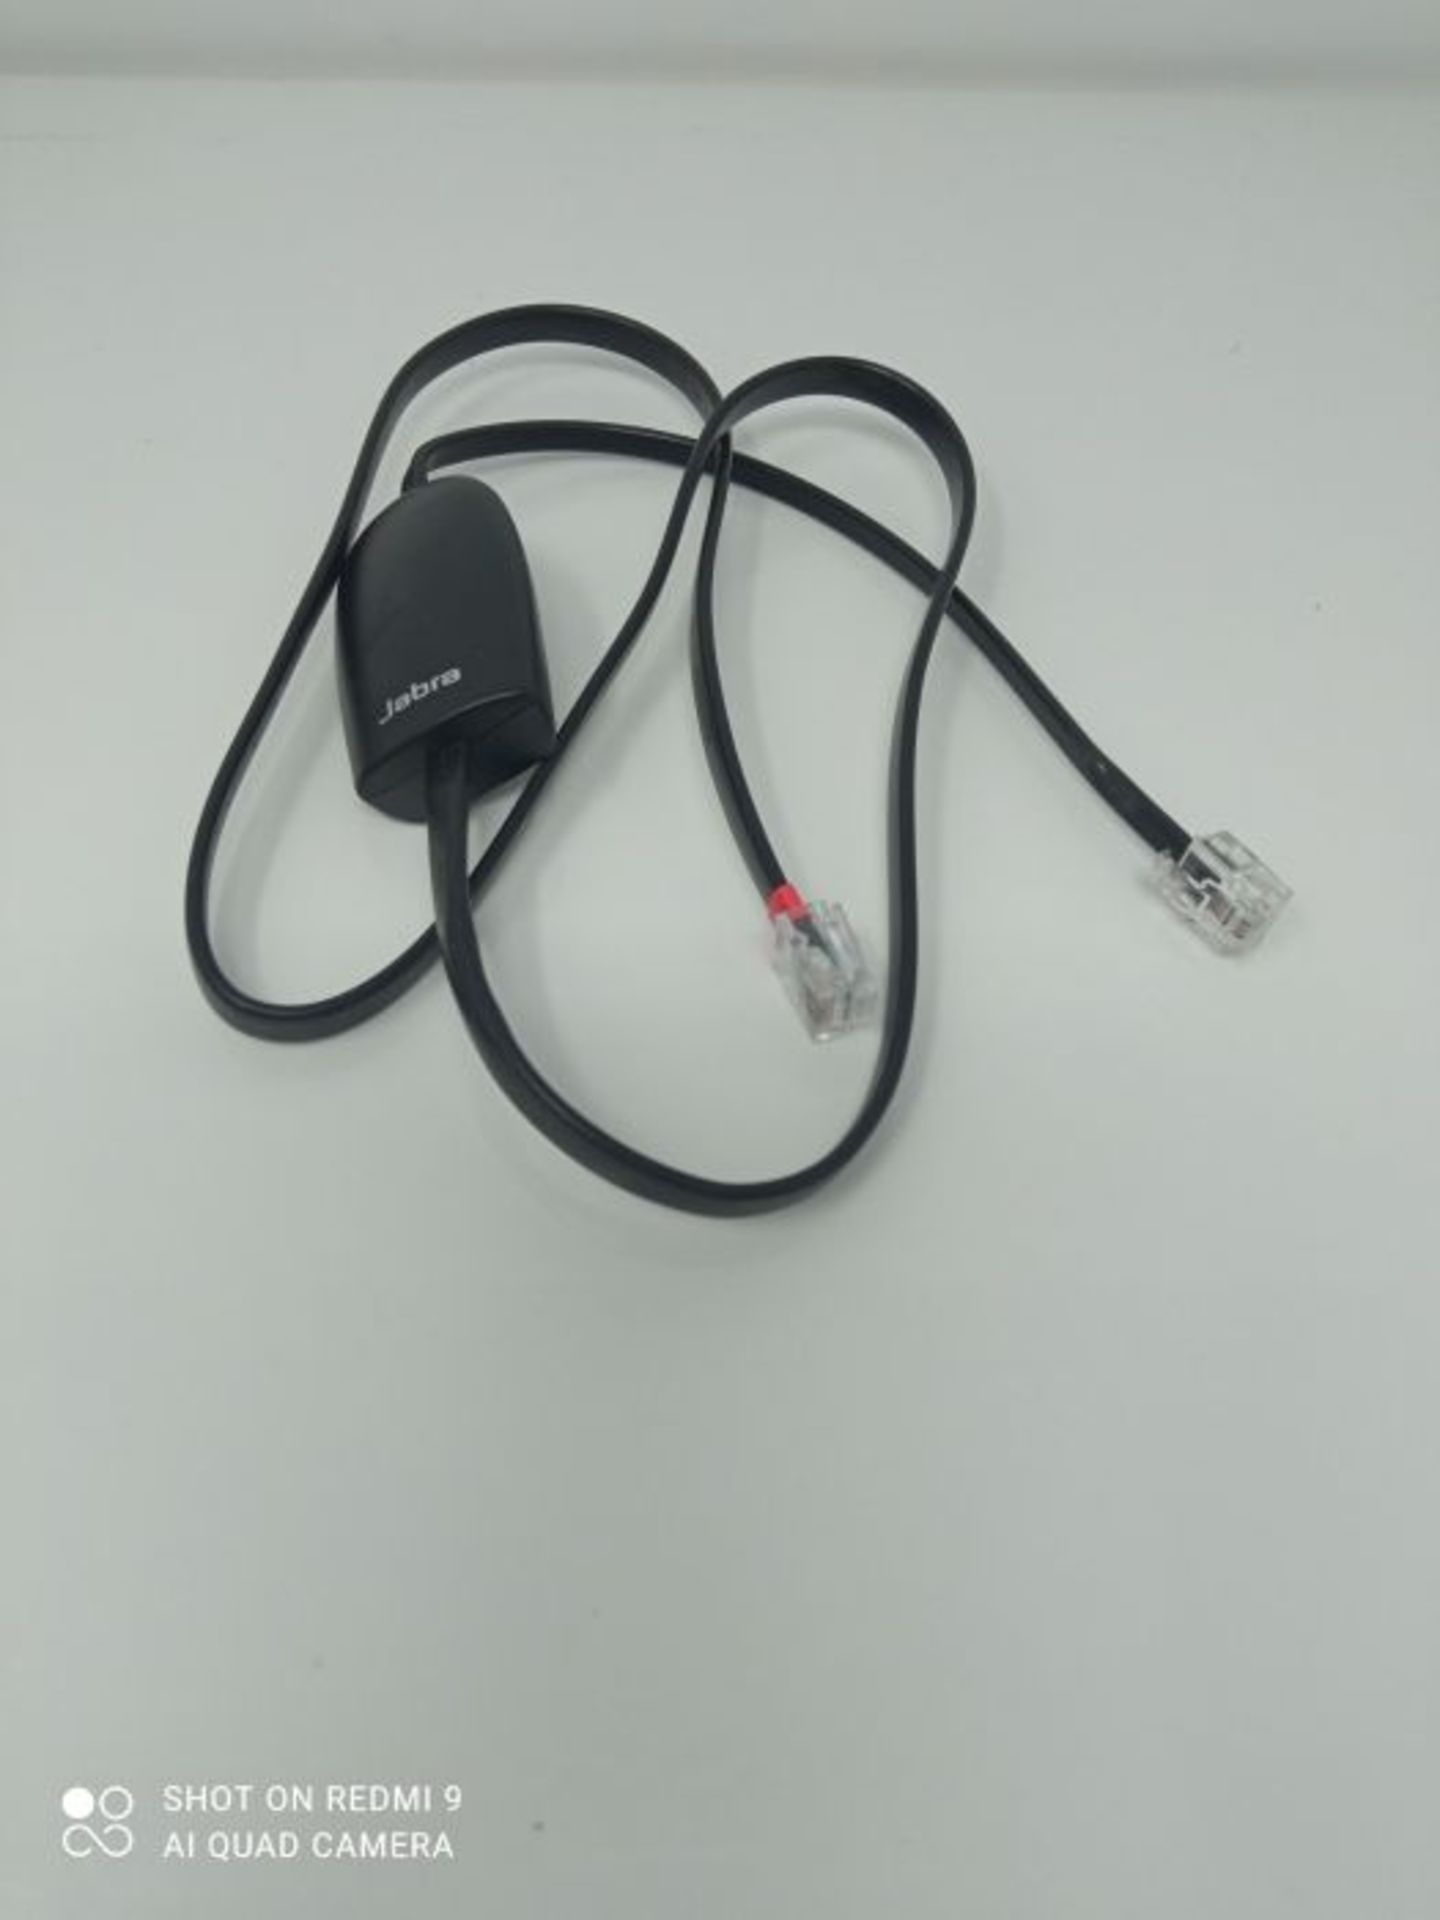 Jabra Cord for GN9120 - Image 2 of 2